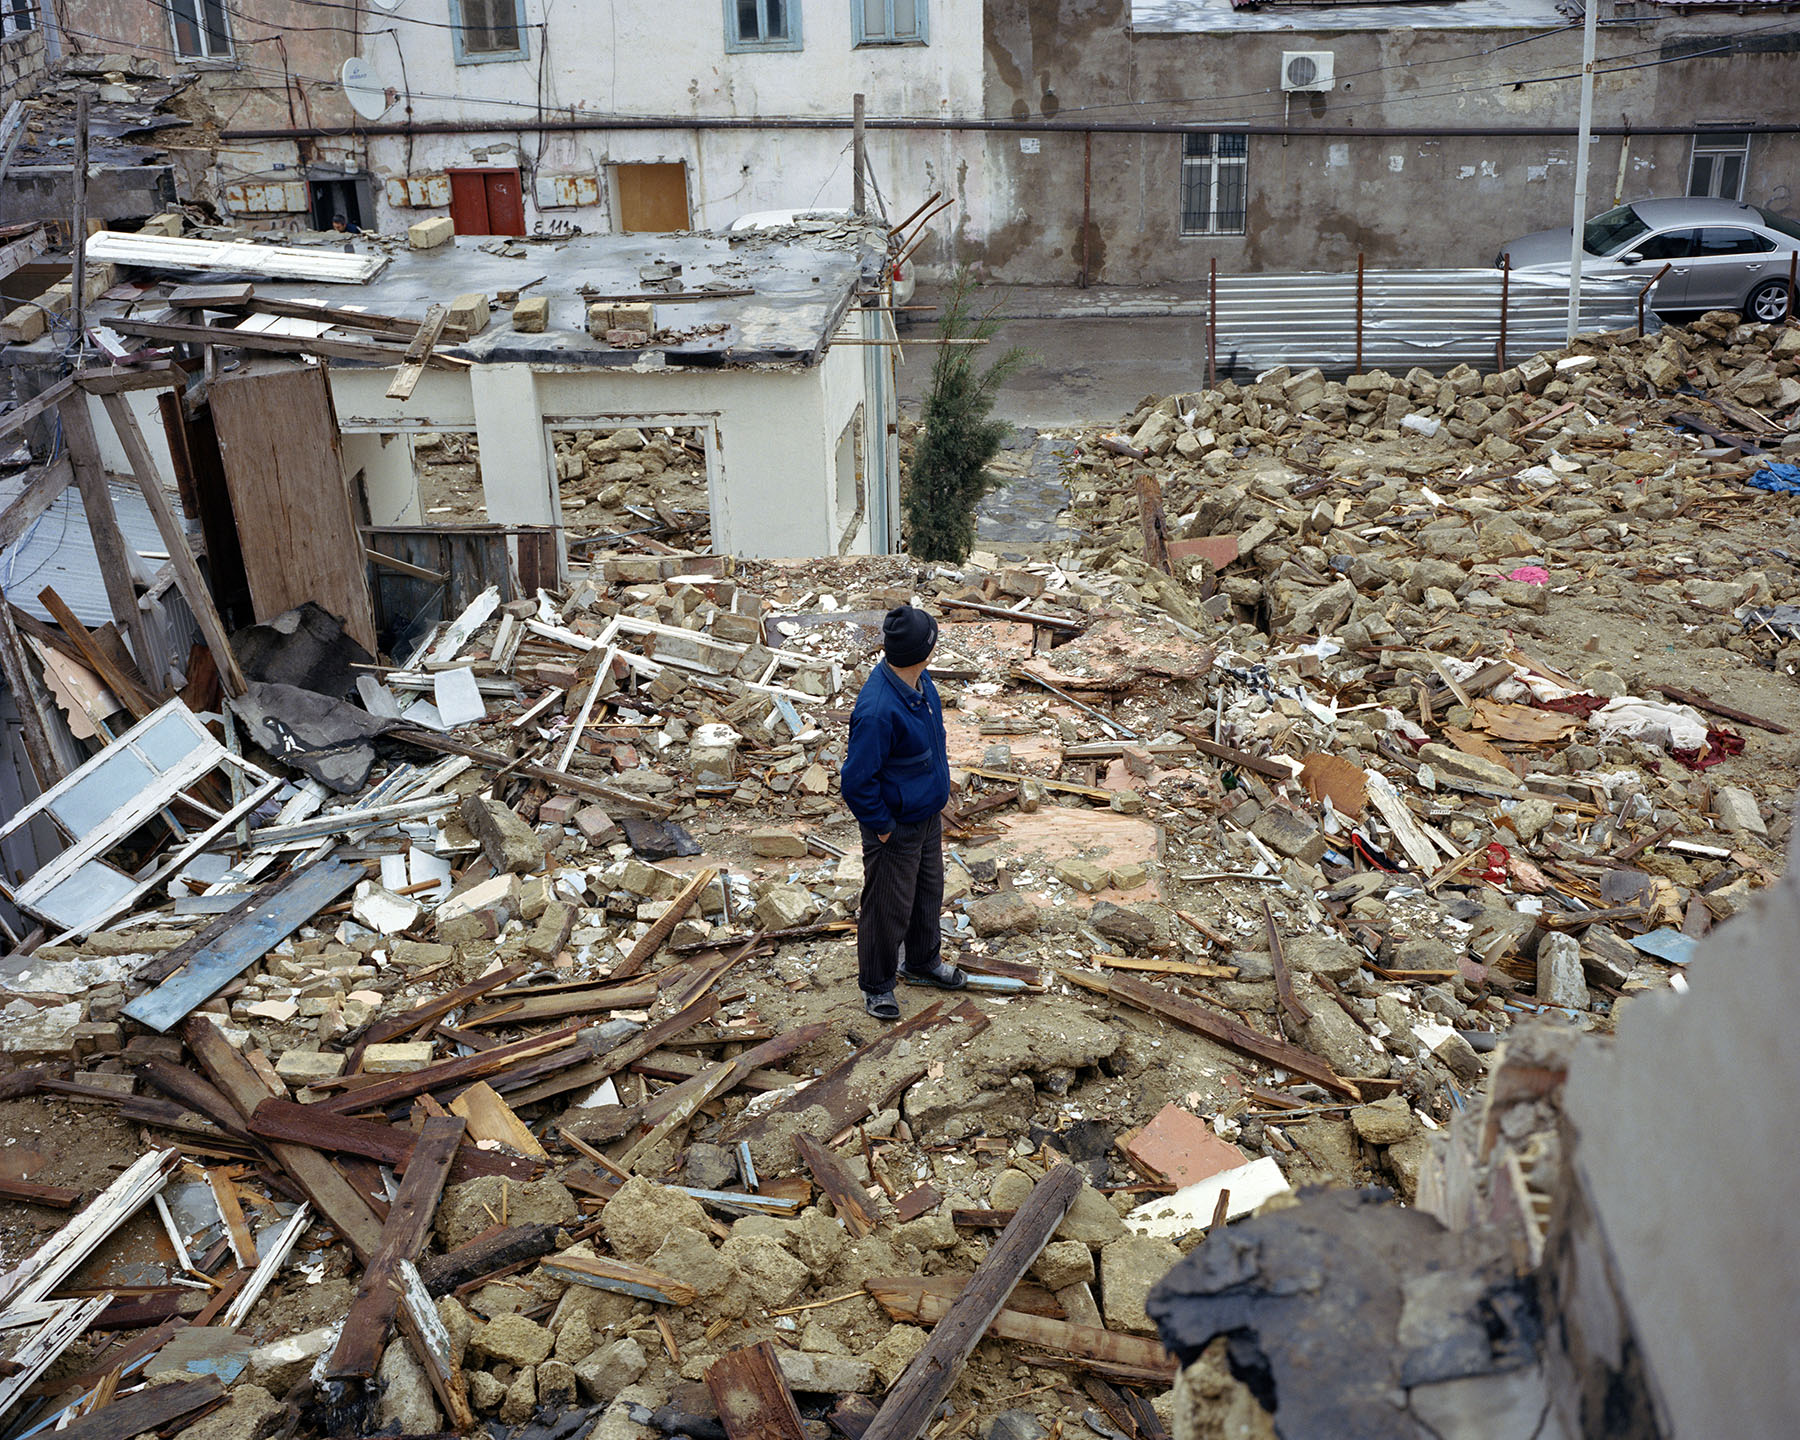 2014: Sovietski was a historical residential area located in the heart of Baku.

The homes of the neighbourhood's residents were demolished to make way for a new park and road.
